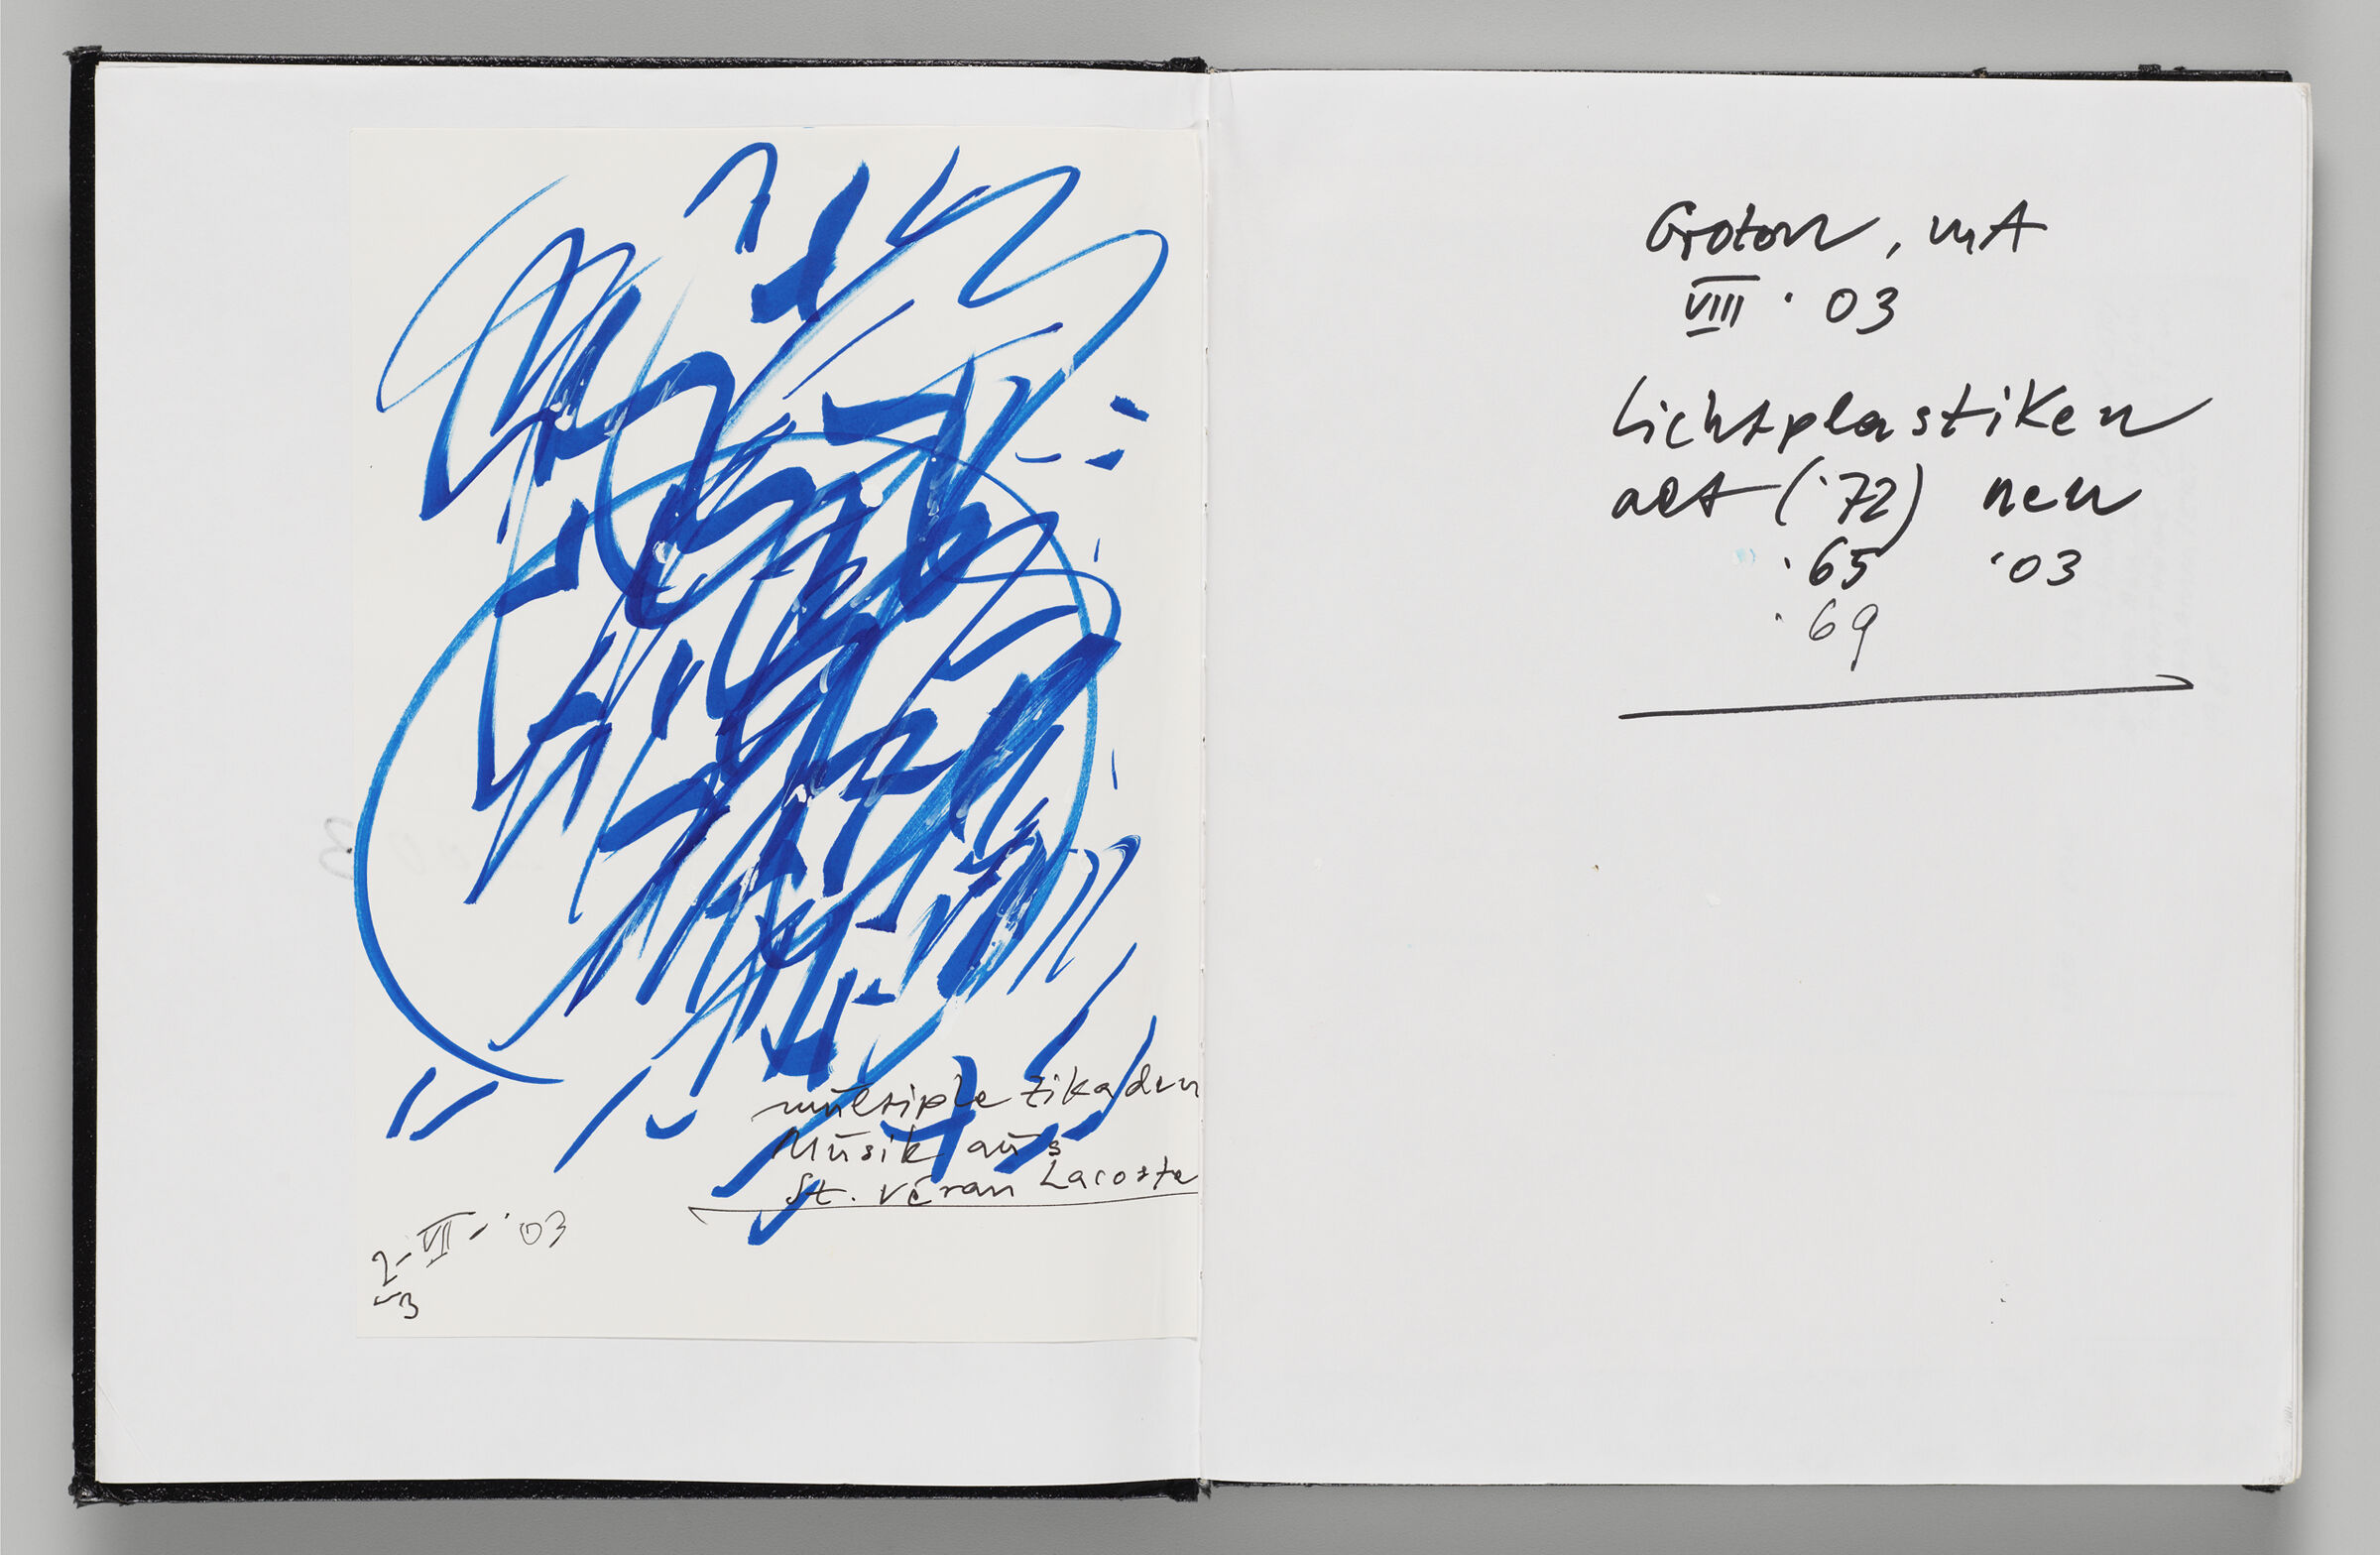 Untitled (Adhered Sheet, Left Page); Untitled (Notes, Right Page)